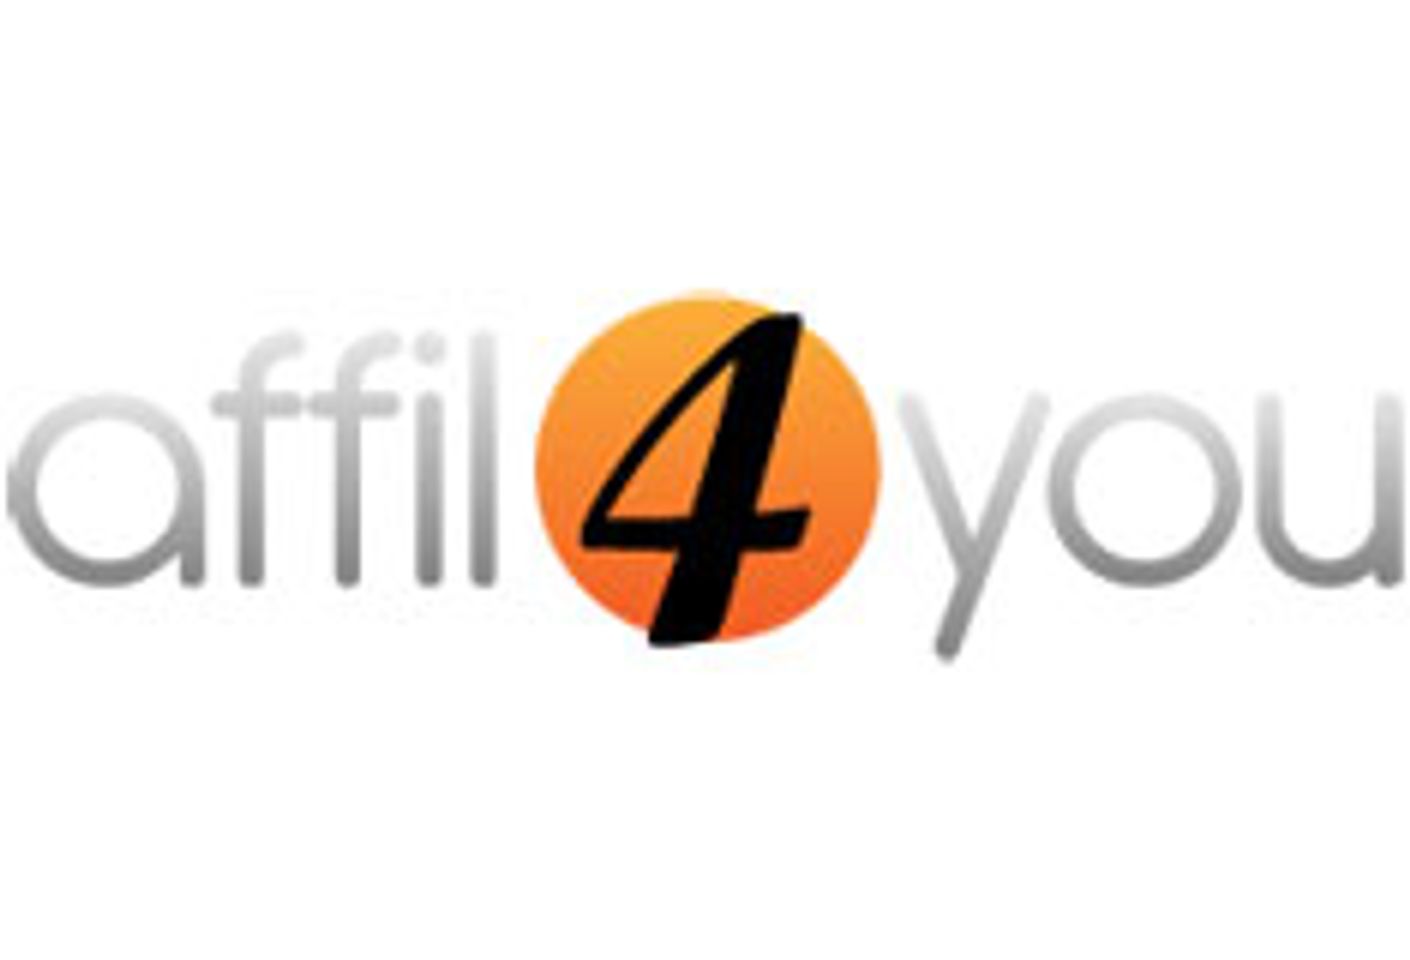 TES Diamond Sponsor Affil4You Signs On for ‘Mobile Days’